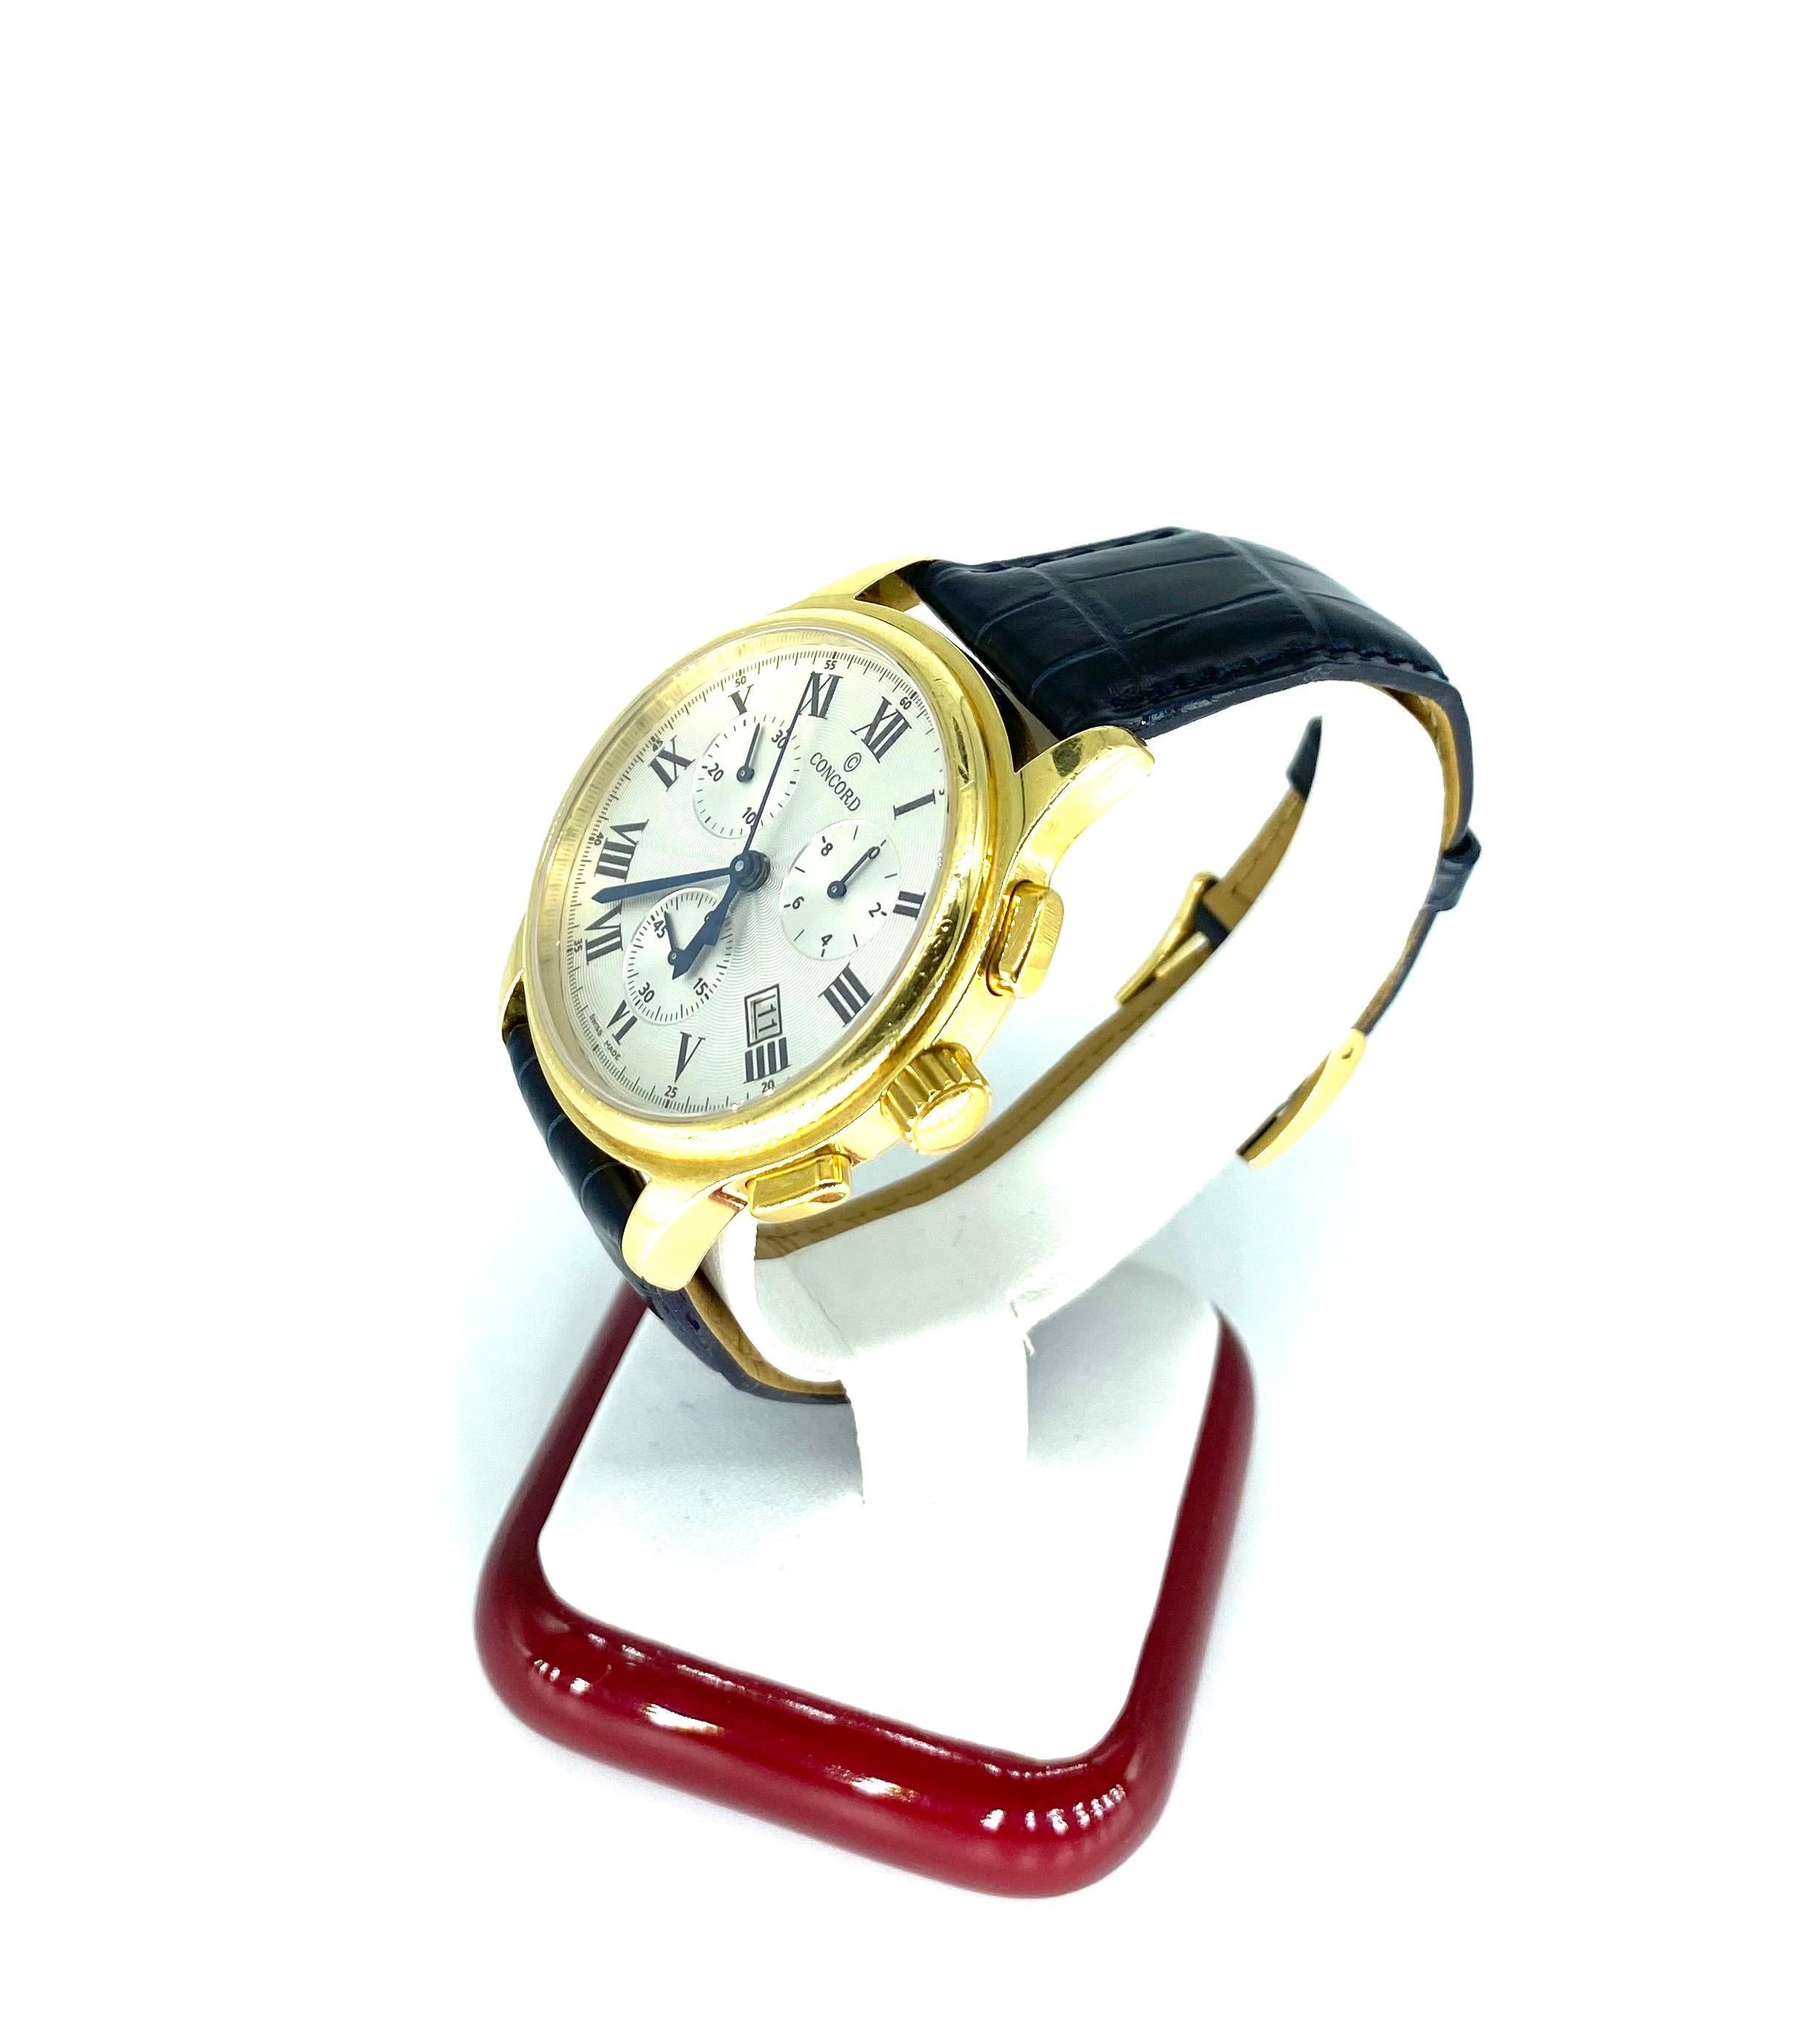 Concord wristwatch with 3 subsidiary dials, a date window, stop watch function. This large 18k gold Concord watch is numbered 50C51893, 1315438. This Swiss made watch is in fine condition, 43.5 mm. across including the crown. The band is a new Blue